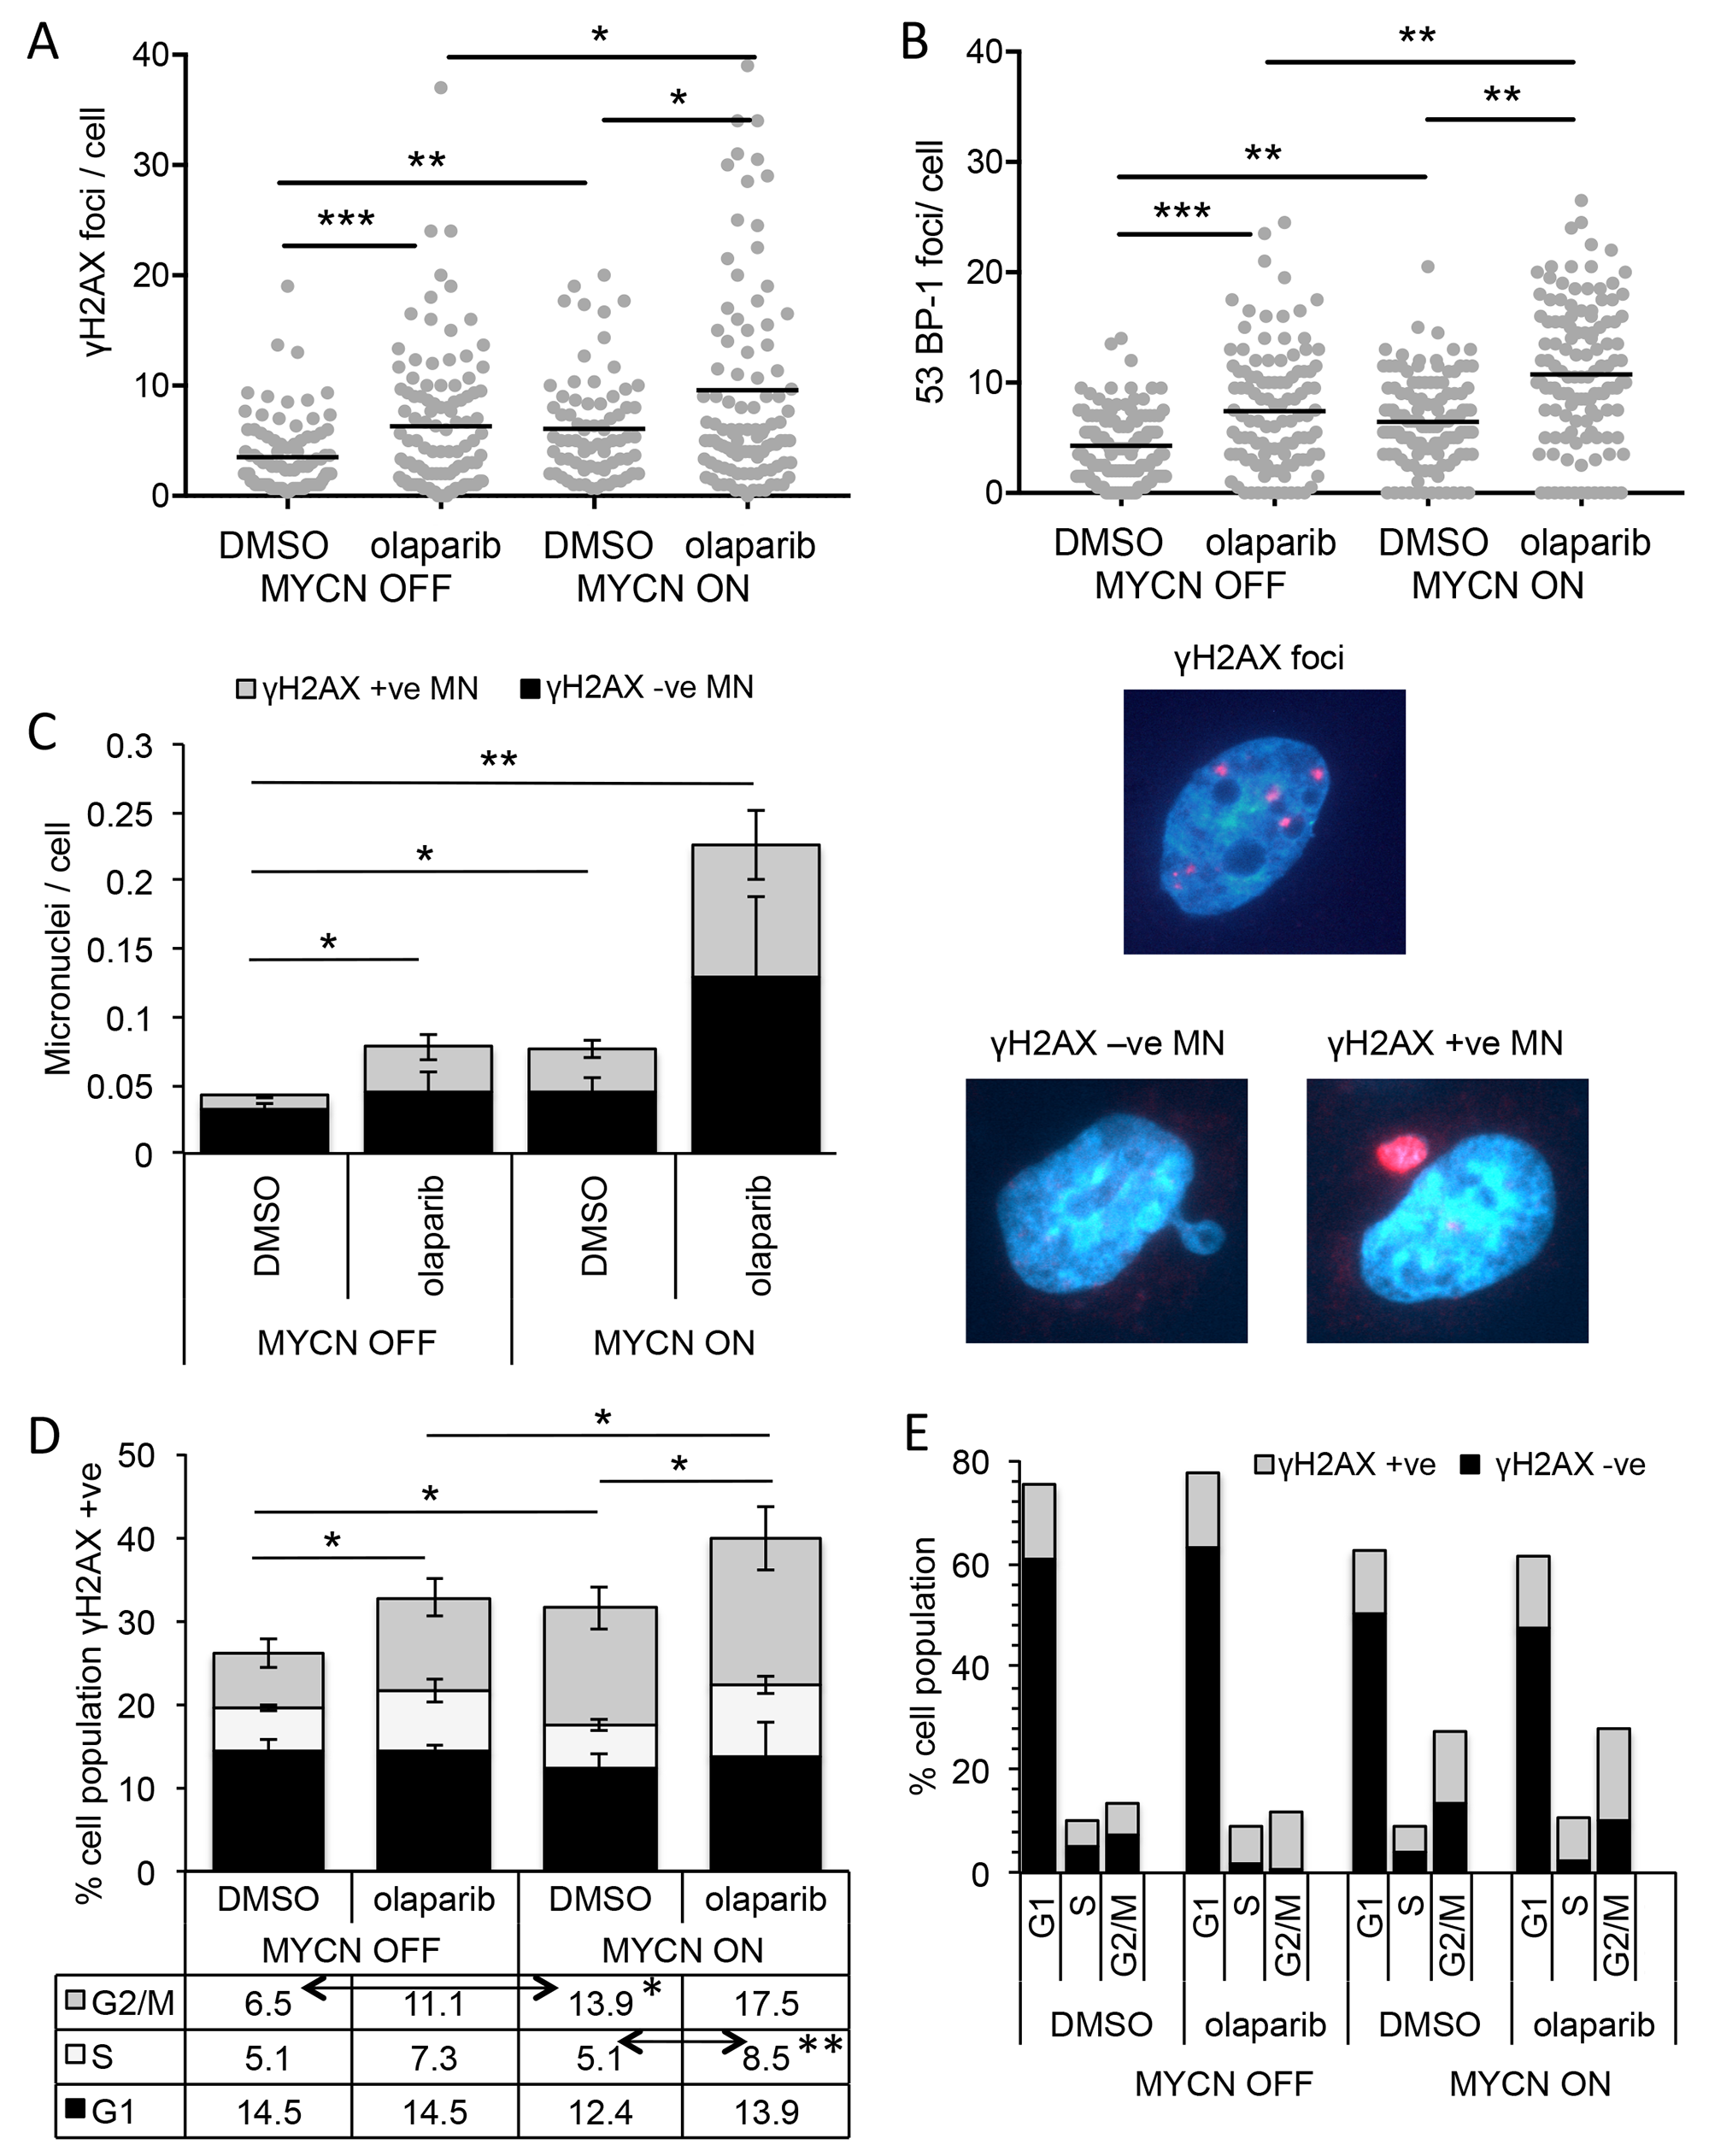 PARP inhibition induces more DNA damage and DNA double-strand breaks in NB cells when MYCN is expressed, predominantly in the S-phase of the cell cycle.